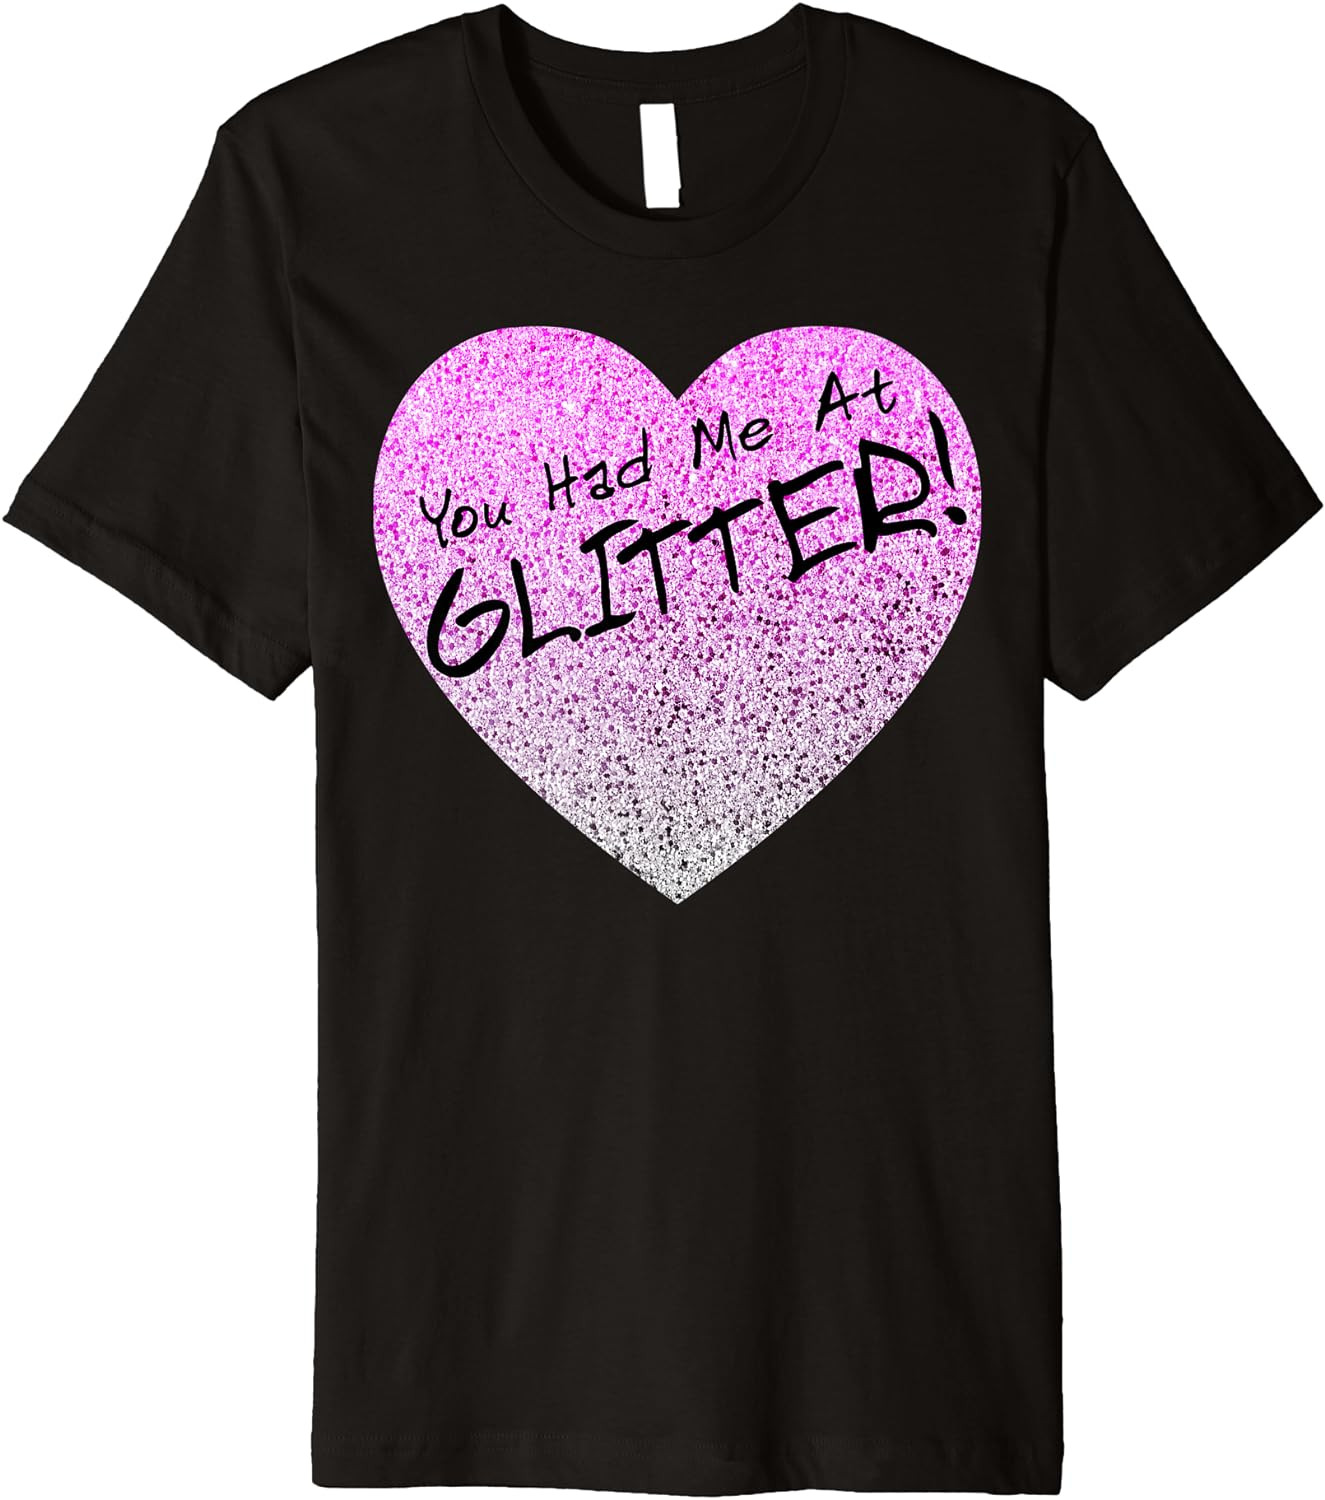 You Had Me At Glitter Cute Funny T-Shirt